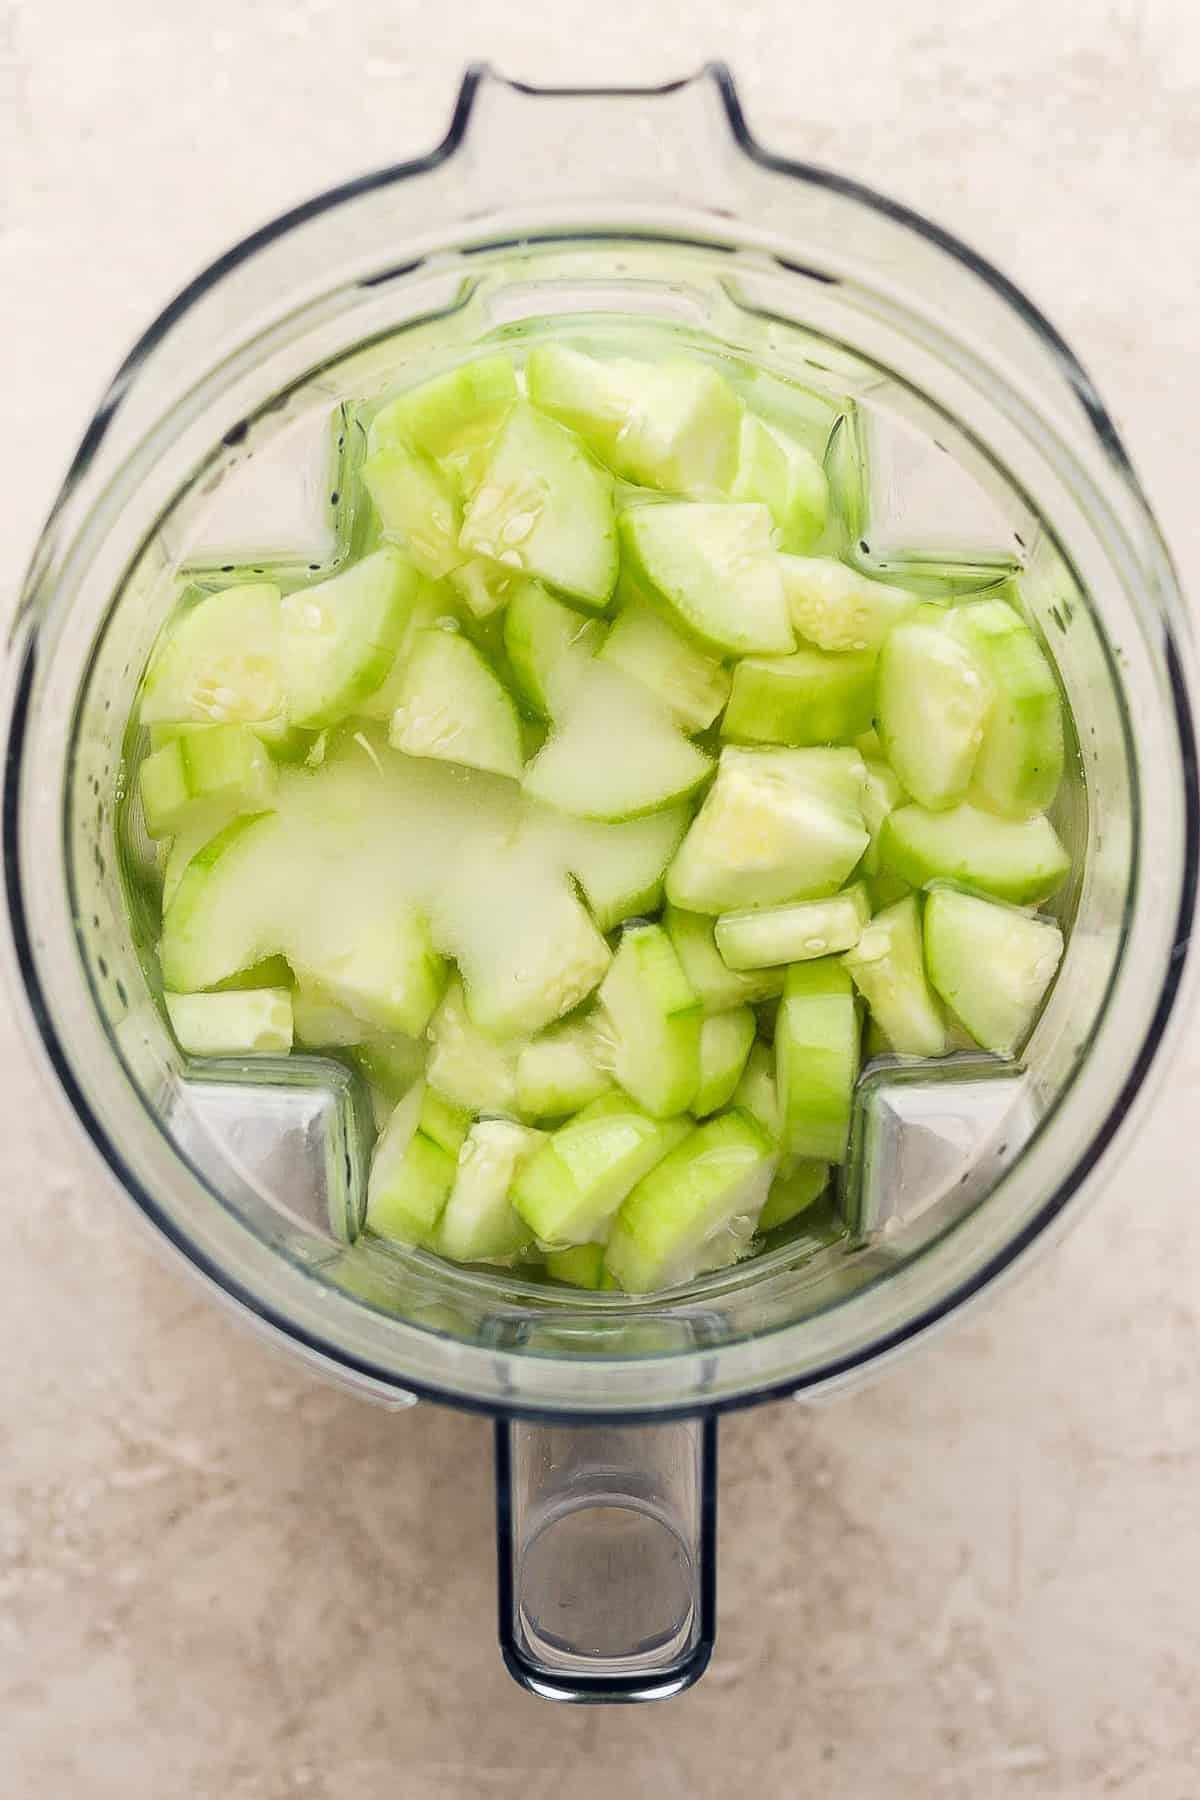 Peeled cucumbers, water, and sugar in a blender.